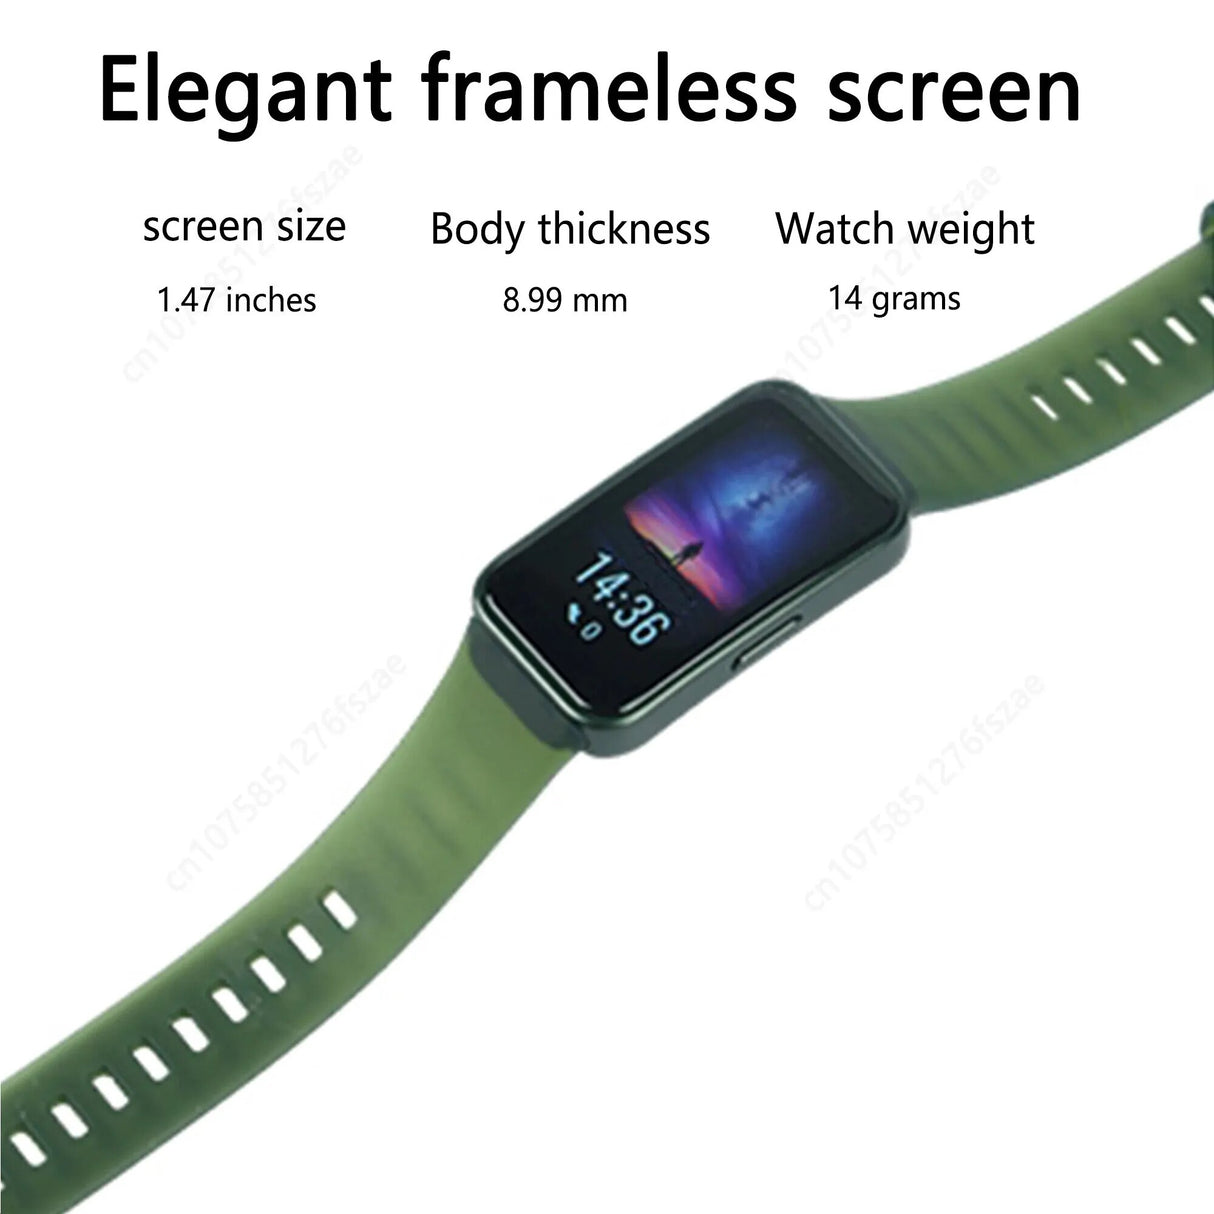 Original  Band 8 Smart Band All-Day Blood Oxygen 1.47'' AMOLED Screen Heart Rate Smartband 2 Weeks Battery Life